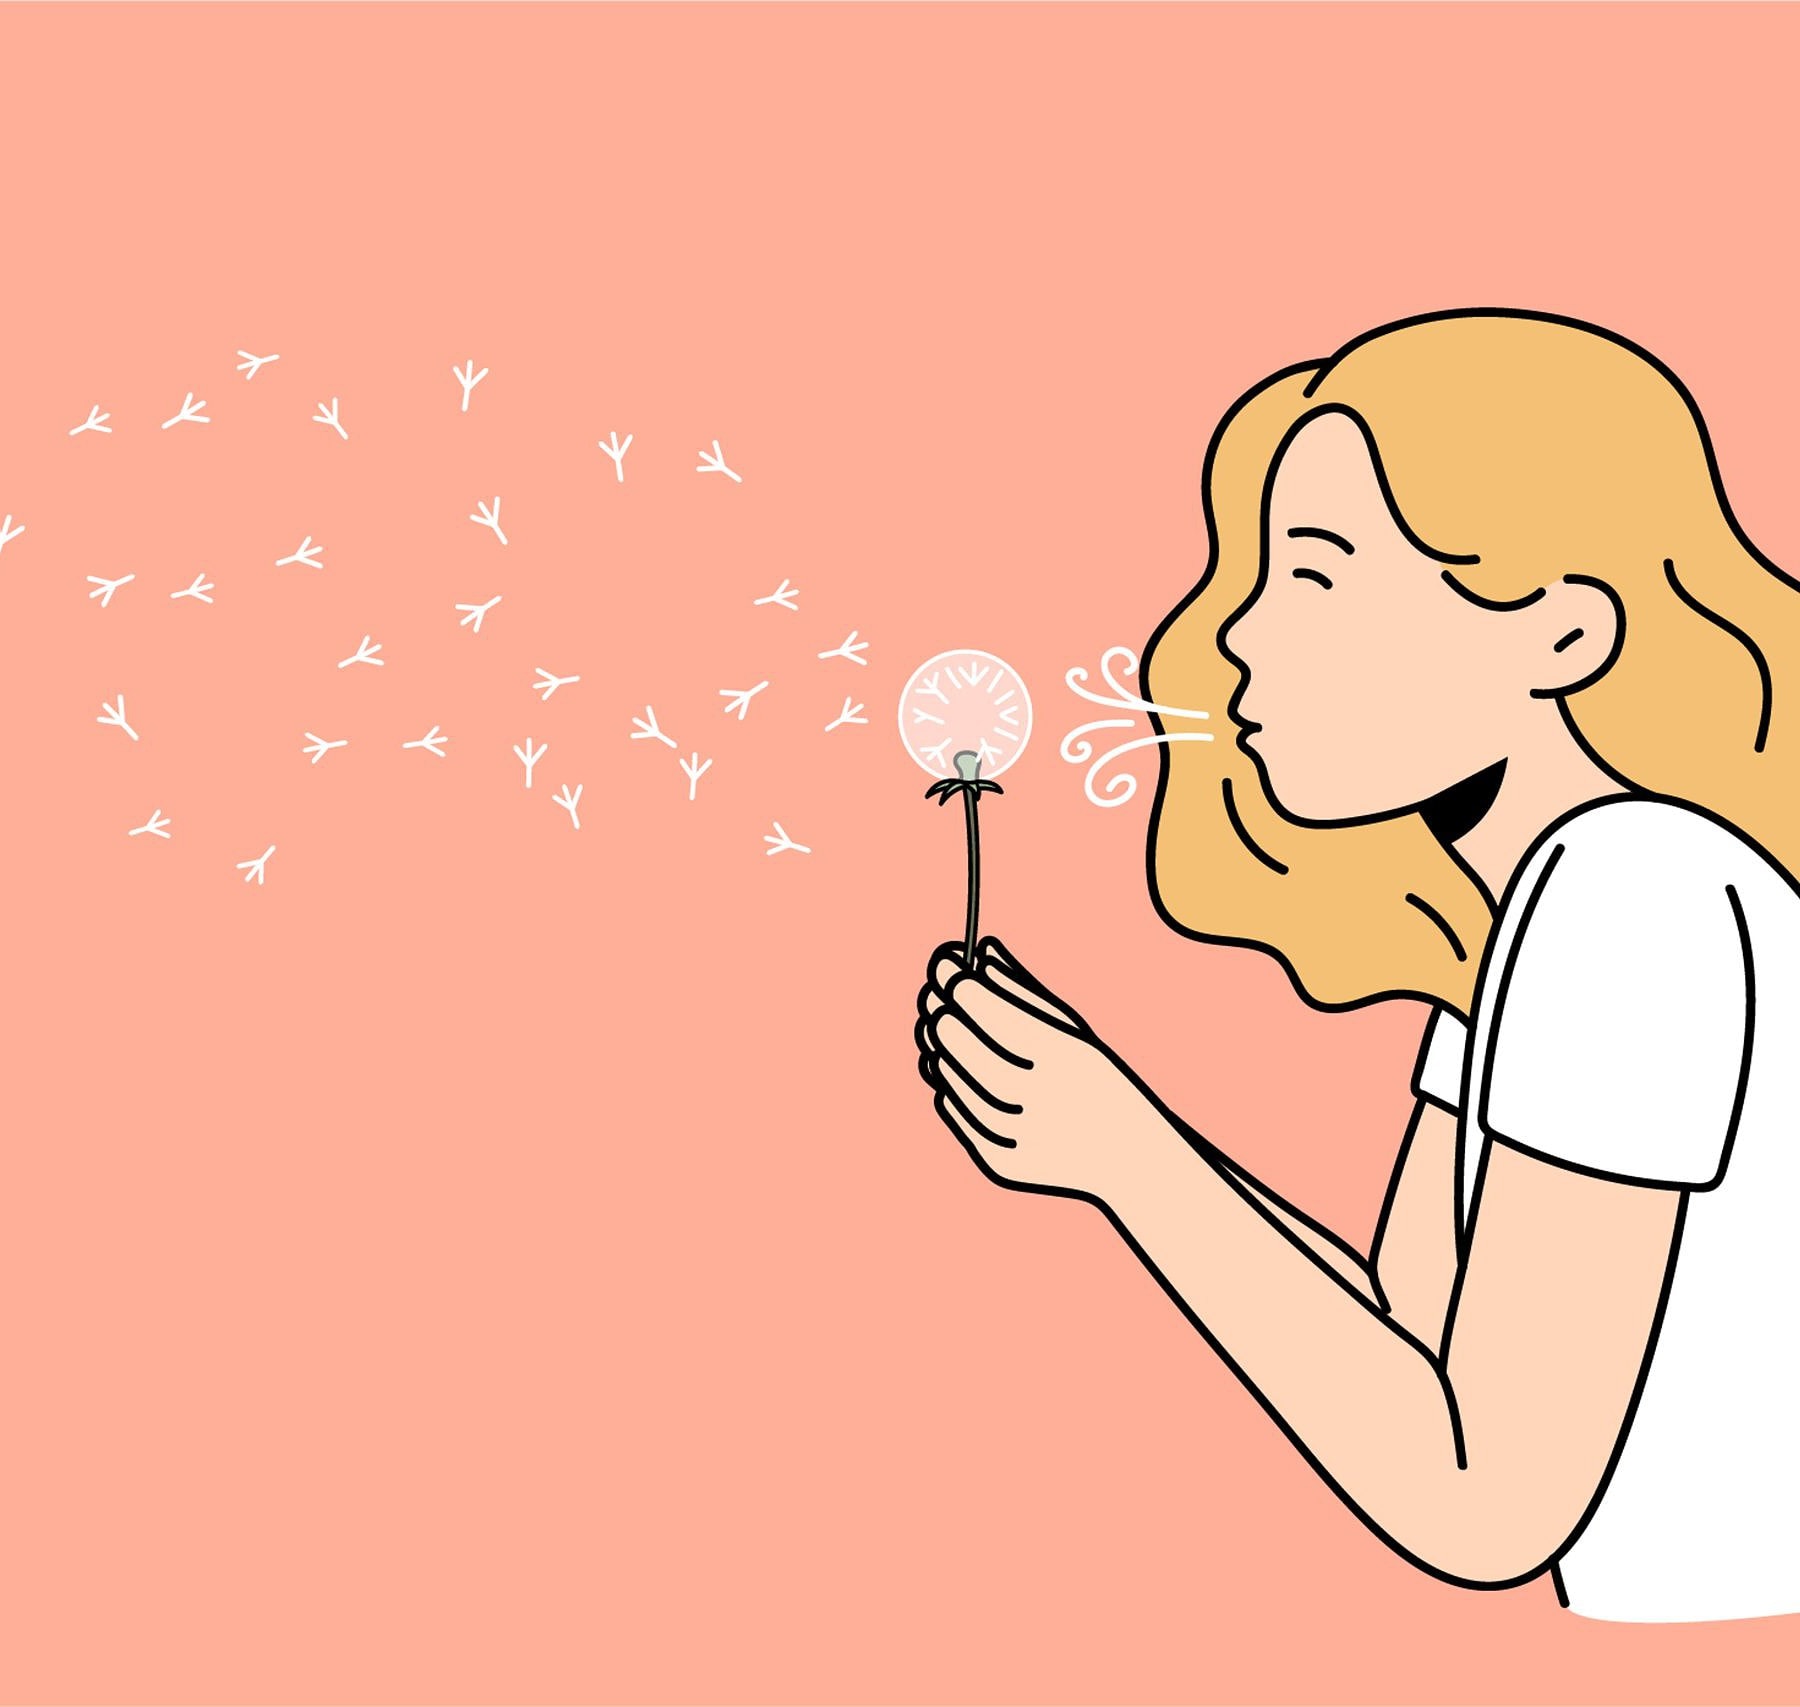 Summer fun and making wish concept. Blonde girl in white t-shirt standing and blowing fluffy dandelion flower during summer walk vector illustration